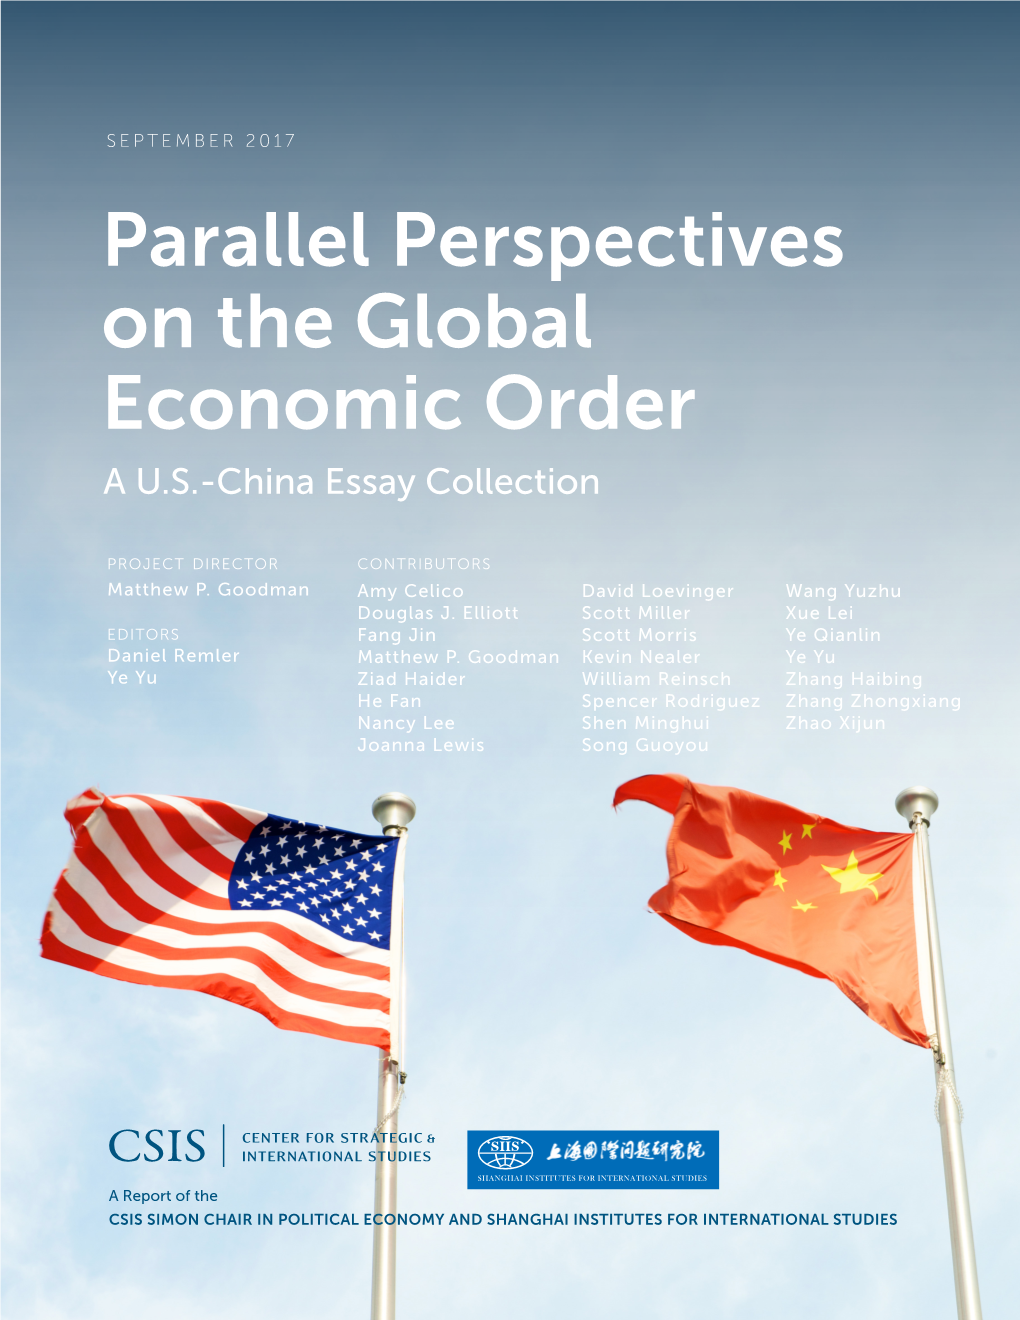 Parallel Perspectives on the Global Economic Order a U.S.-China Essay Collection